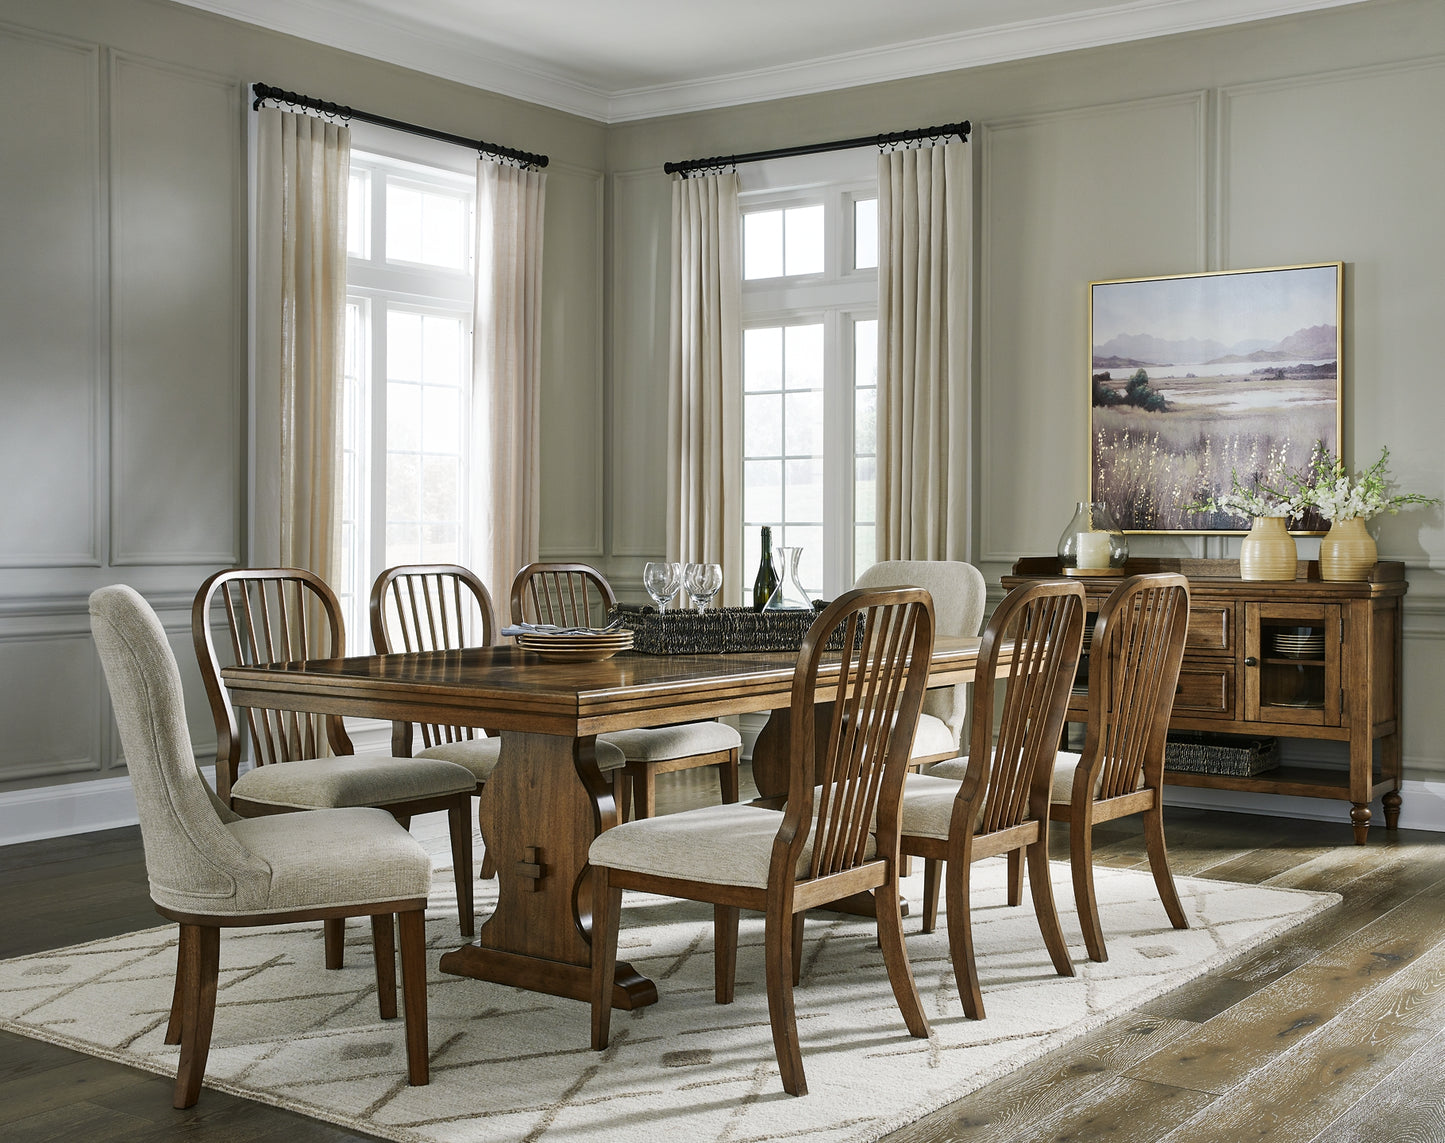 Sturlayne Dining Table and 8 Chairs